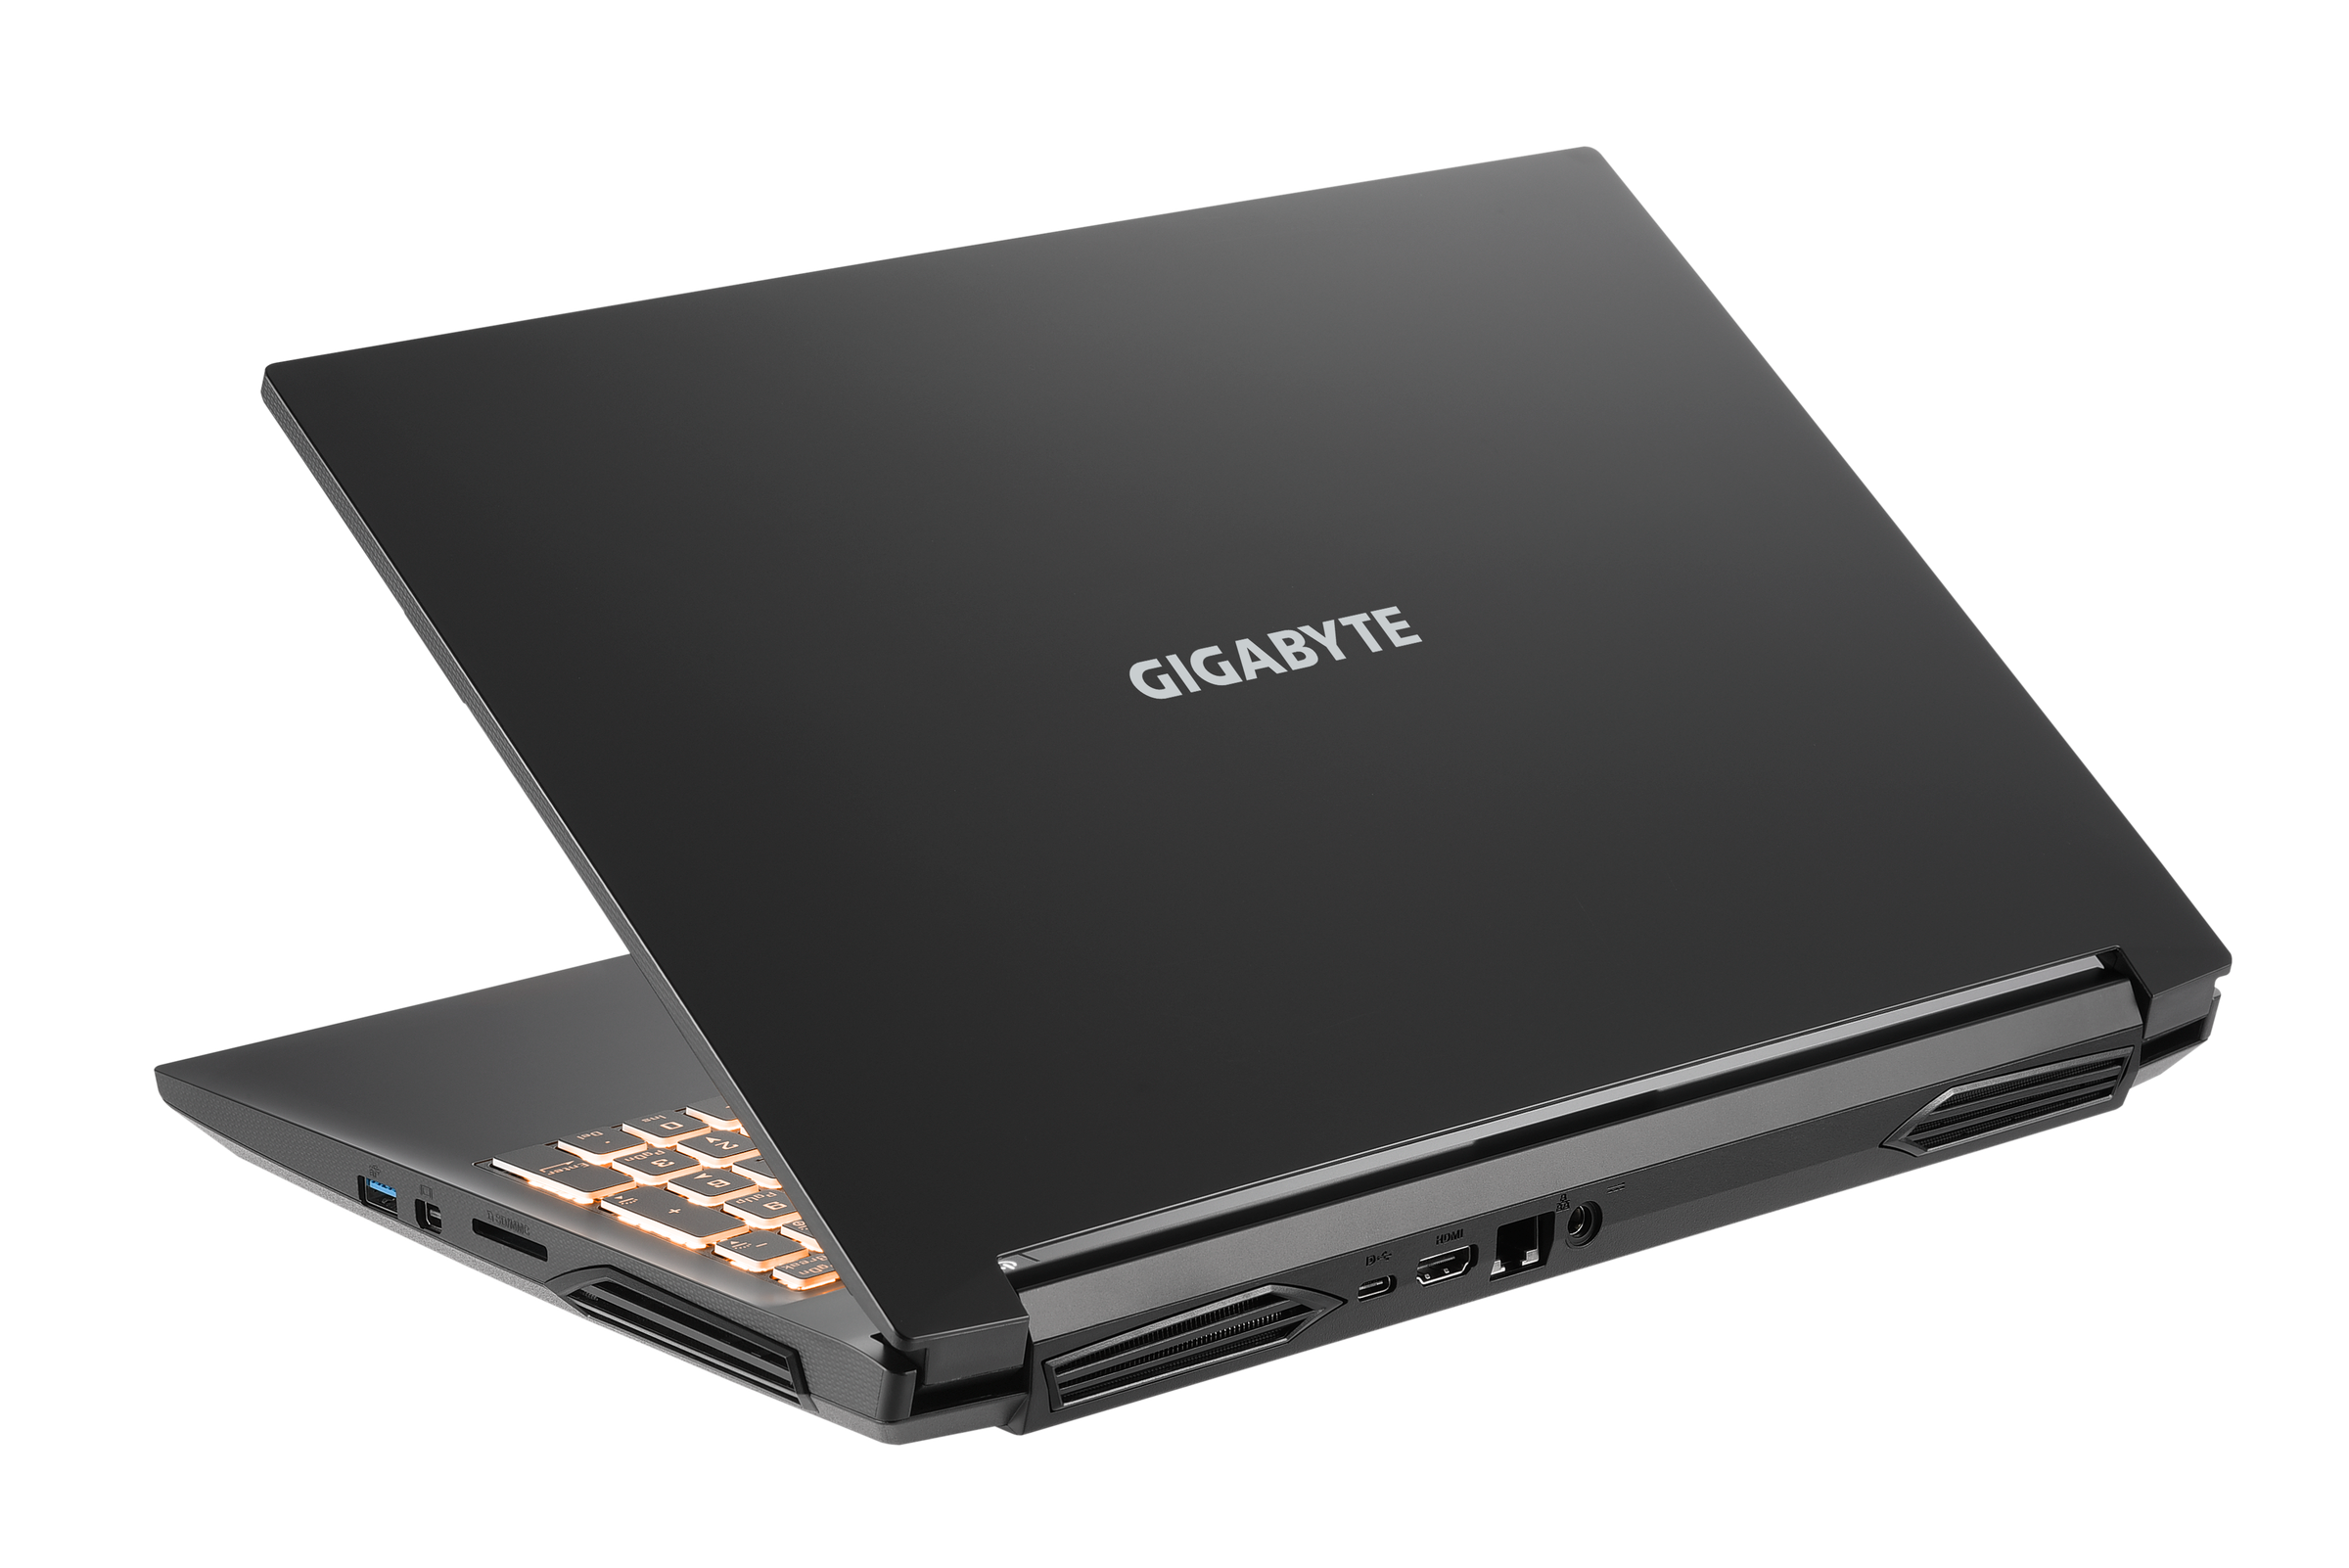 The Gigabyte G5 angled away from the camera, half closed, with the Gigabyte logo visible.